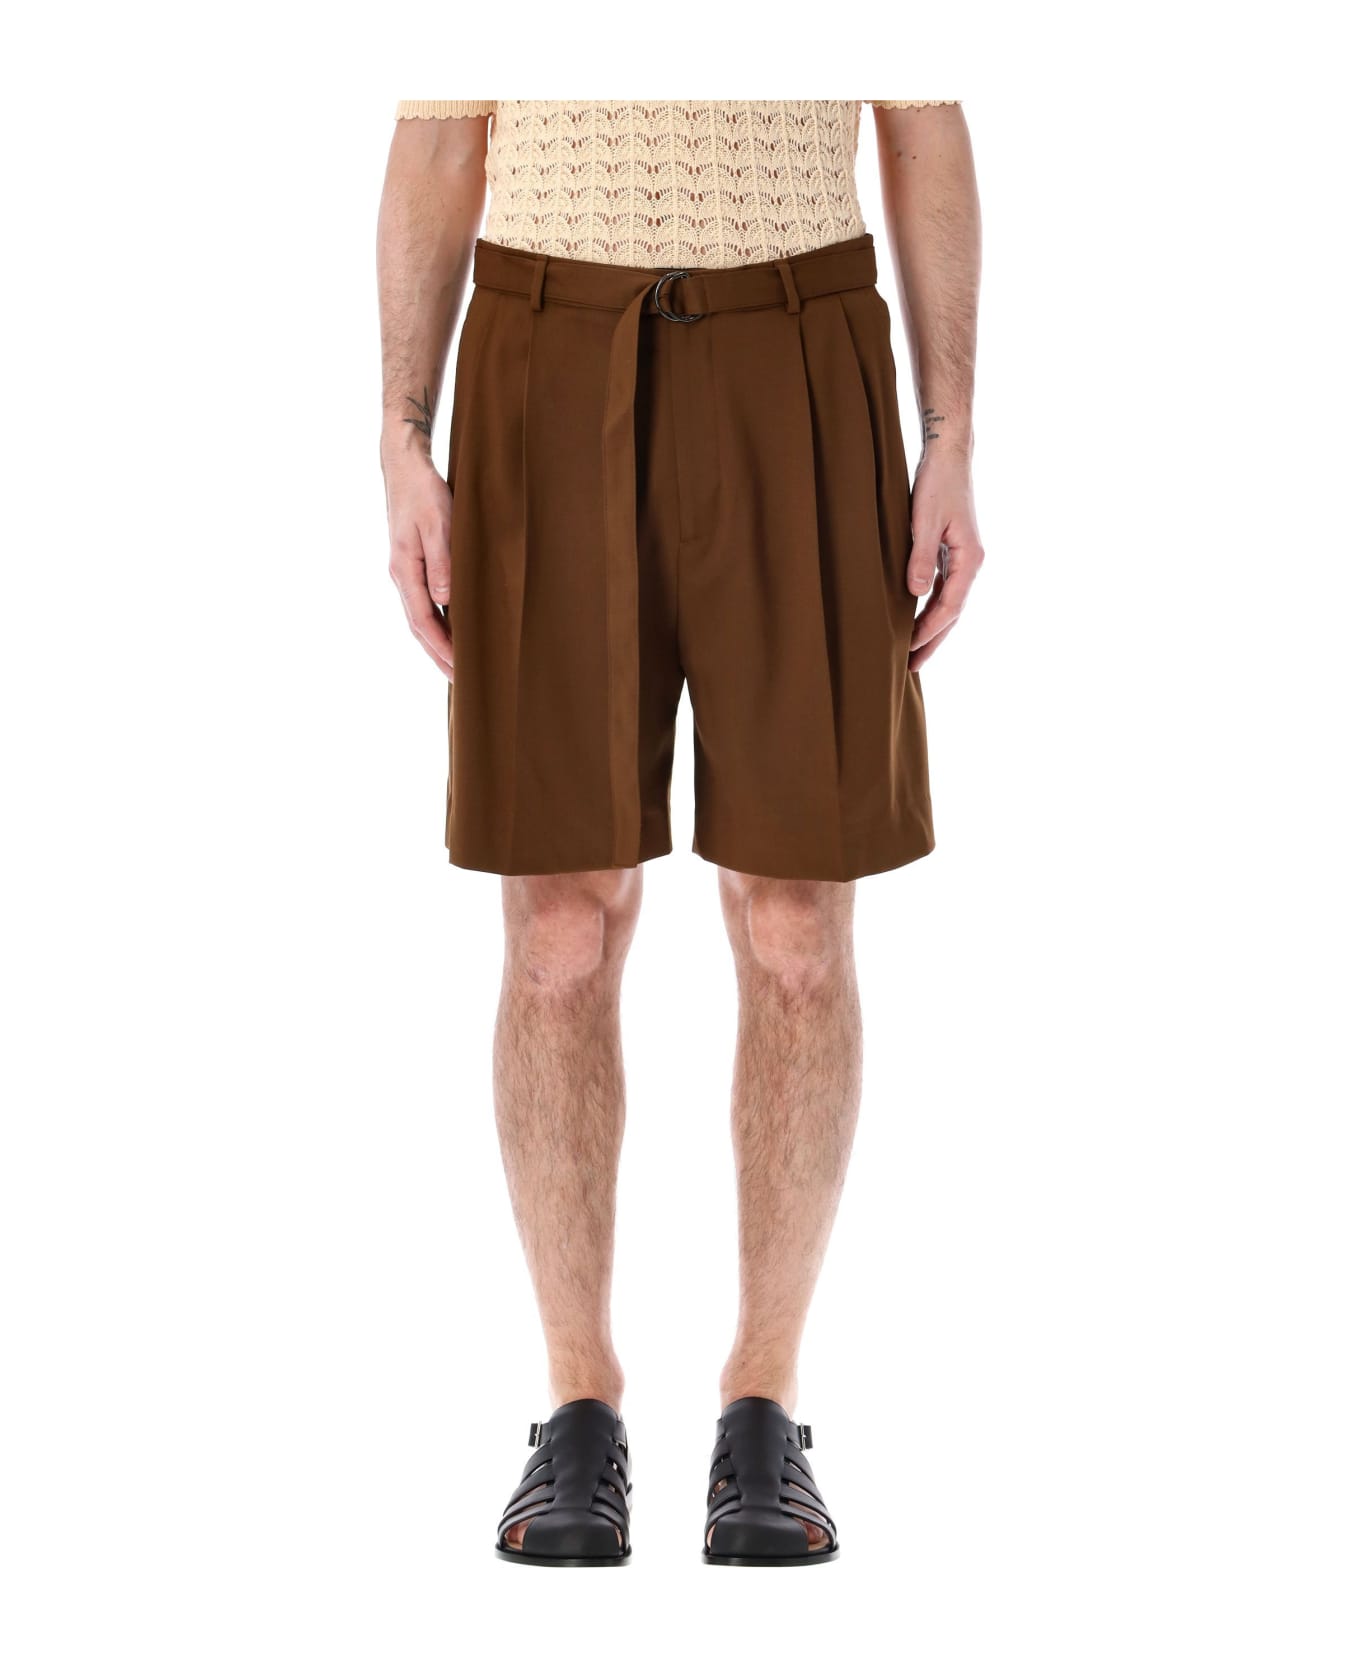 CMMN SWDN Marshall Pleated Shorts - BROWN